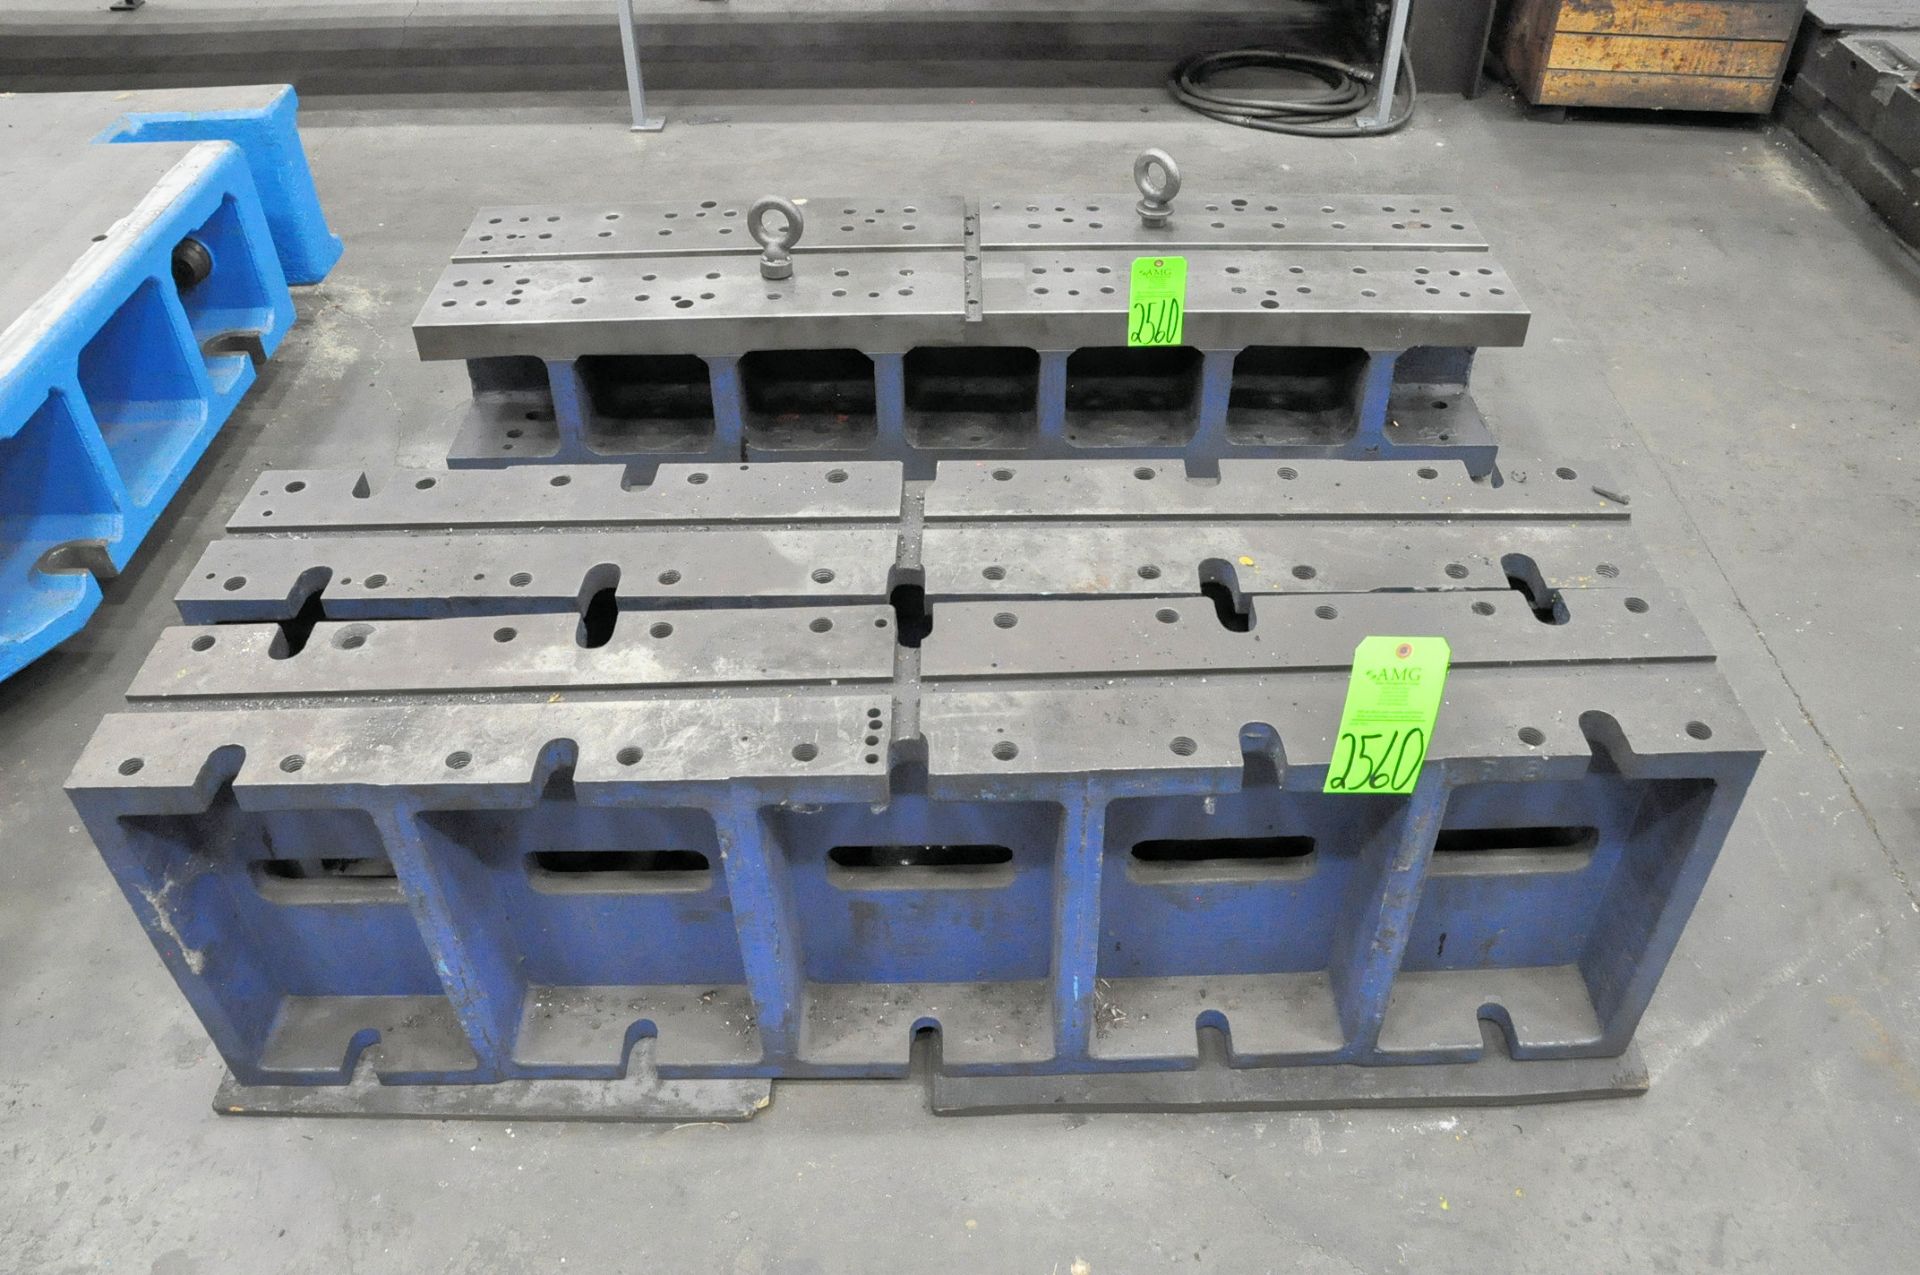 Lot-(2) 9" x 59" x 18"H and (1) 17" x 67" x 12"H Risers, (D-24), (Green Tag)